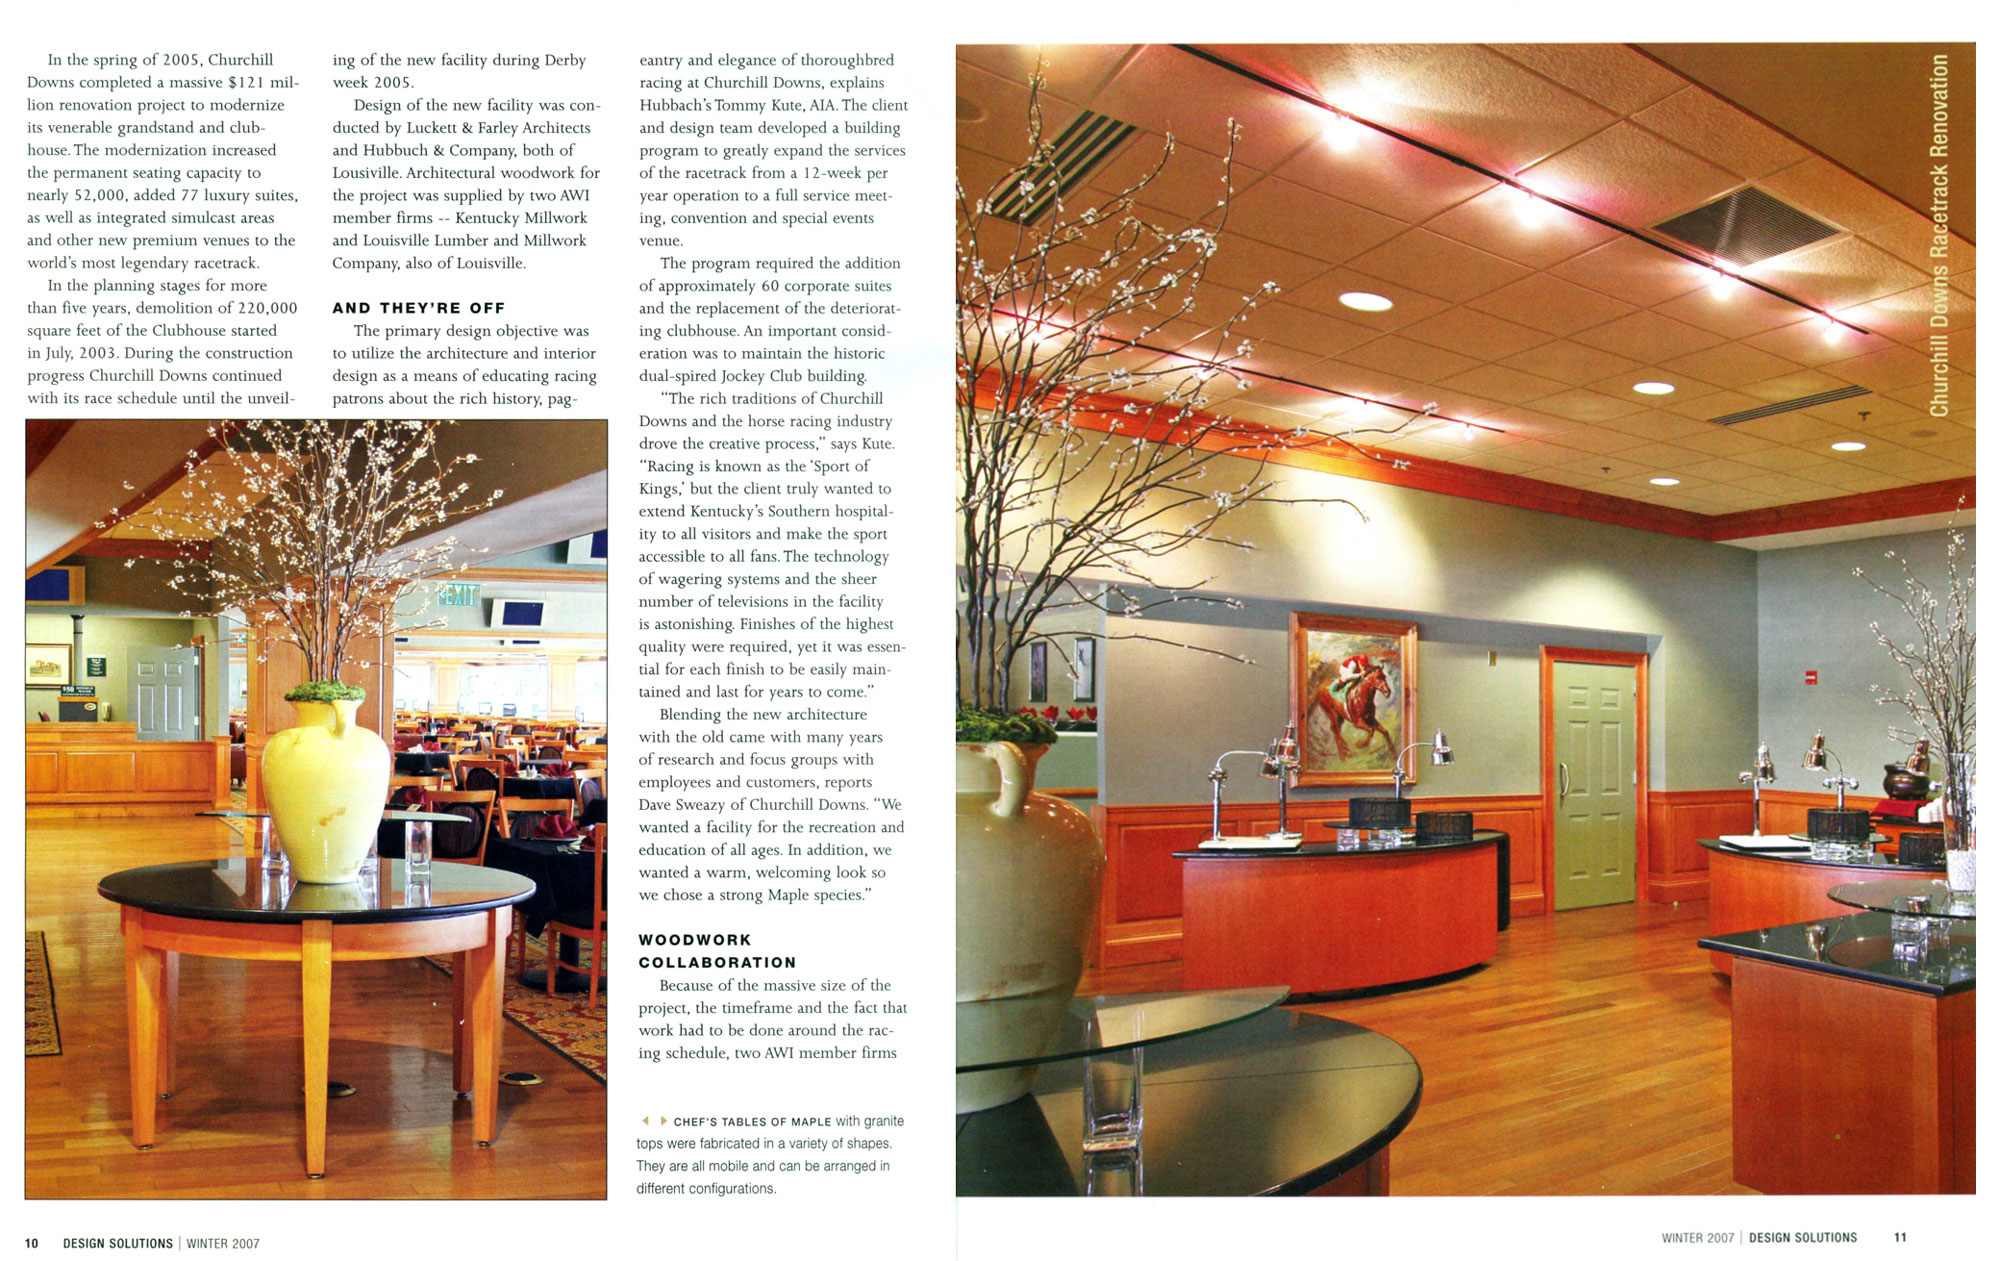 Pictures of wainscoting used in the Churchill Downs magazine